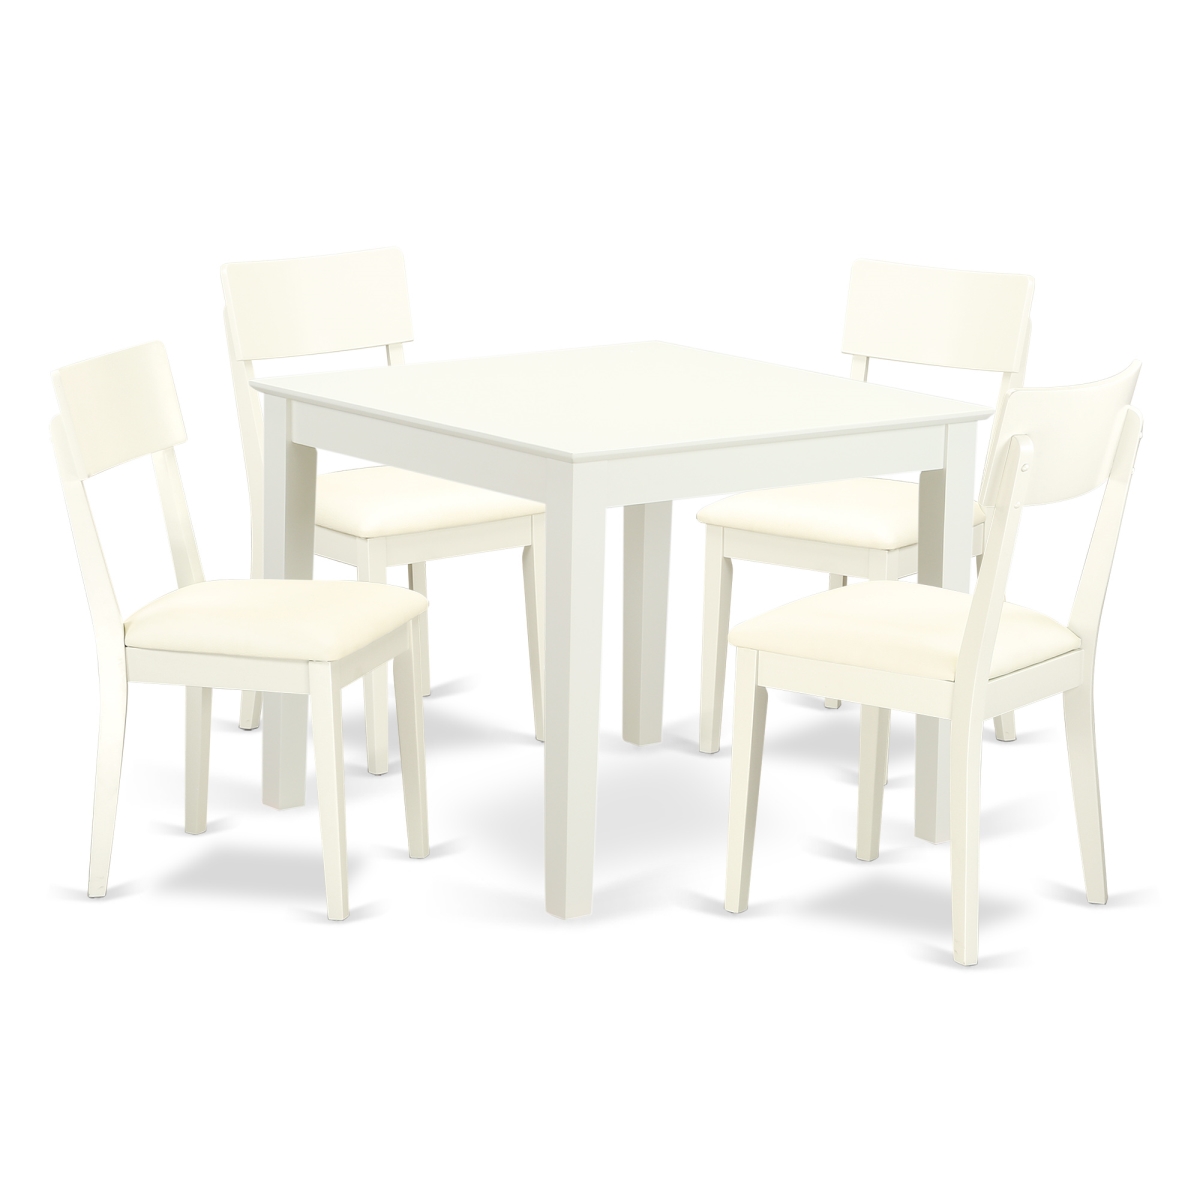 Oxad5-lwh-lc 5 Piece Dinette Table Set, Linen White